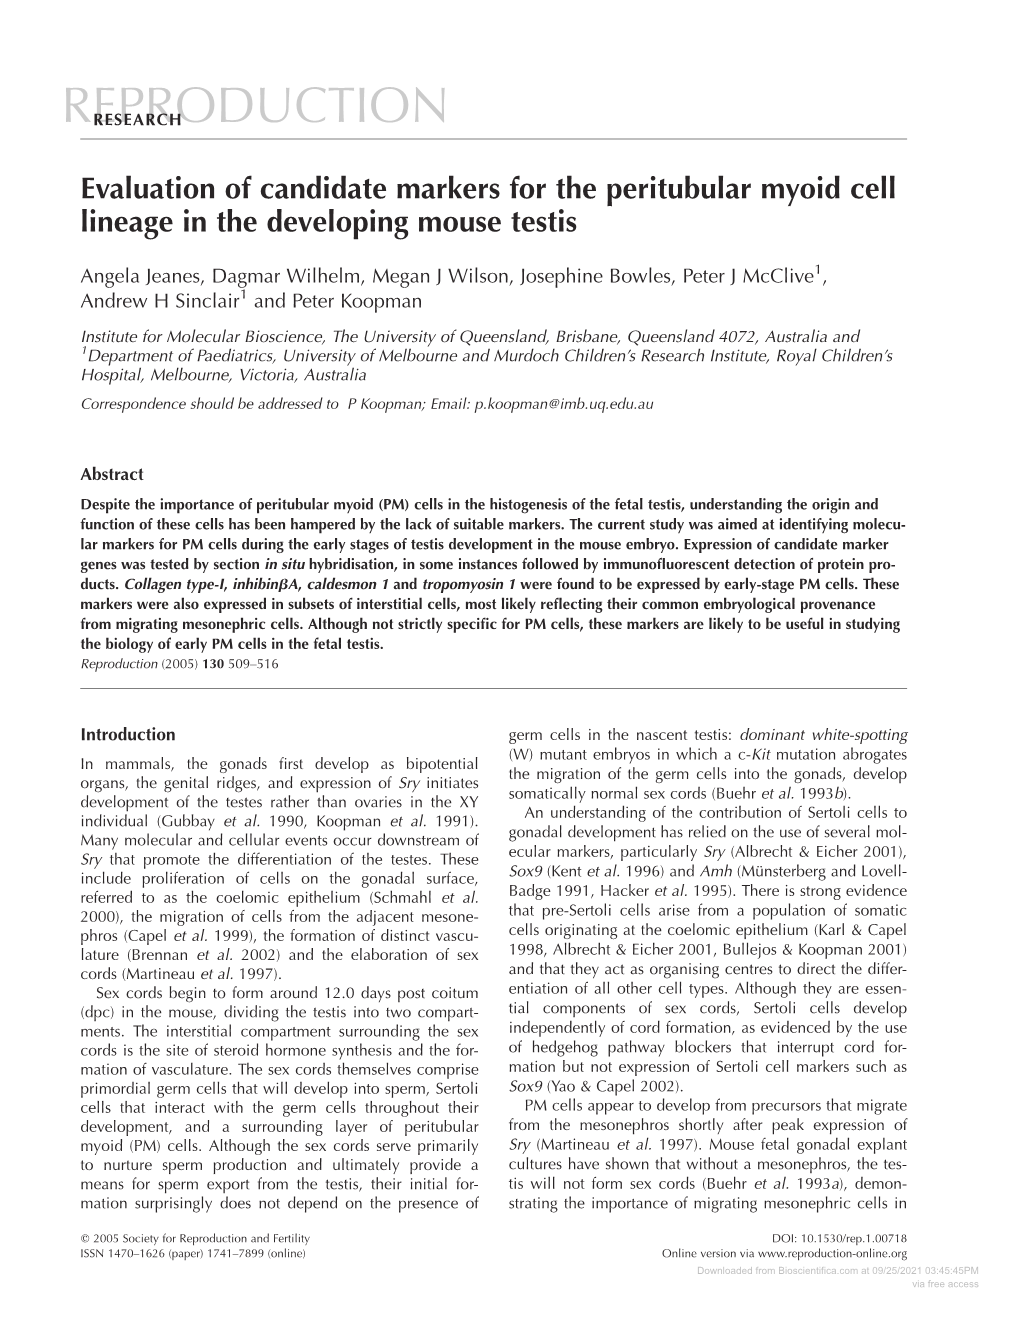 Evaluation of Candidate Markers for the Peritubular Myoid Cell Lineage in the Developing Mouse Testis